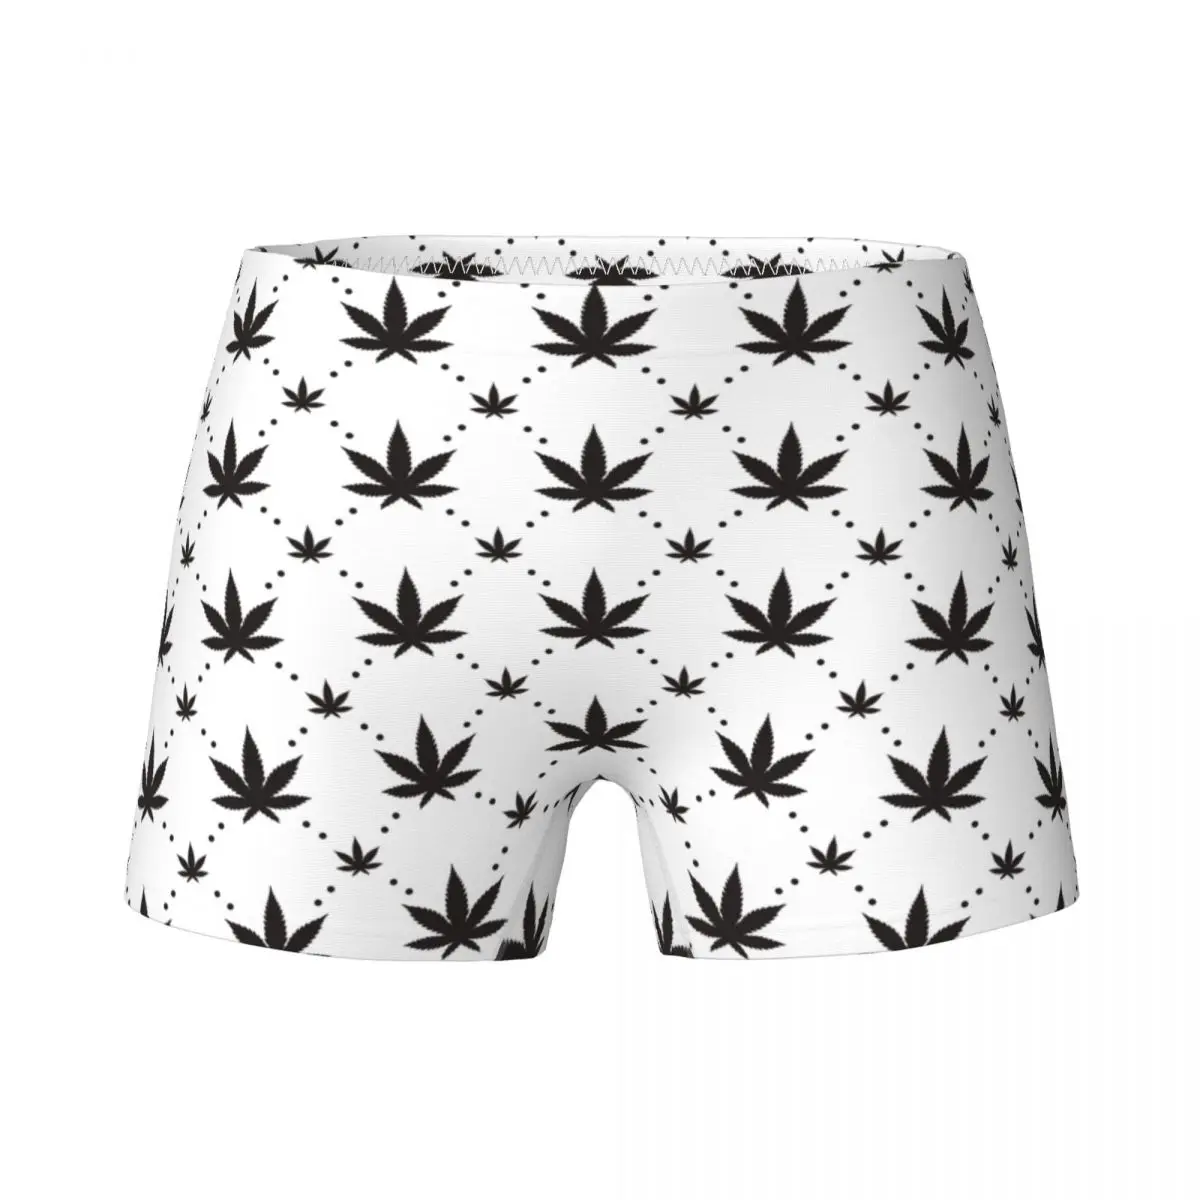 

Cannabis Leaf Child Girls Underwear Kids Boxers Briefs Soft Cotton Teenage Panties Weed Retro Style Underpants Size 4T-15T